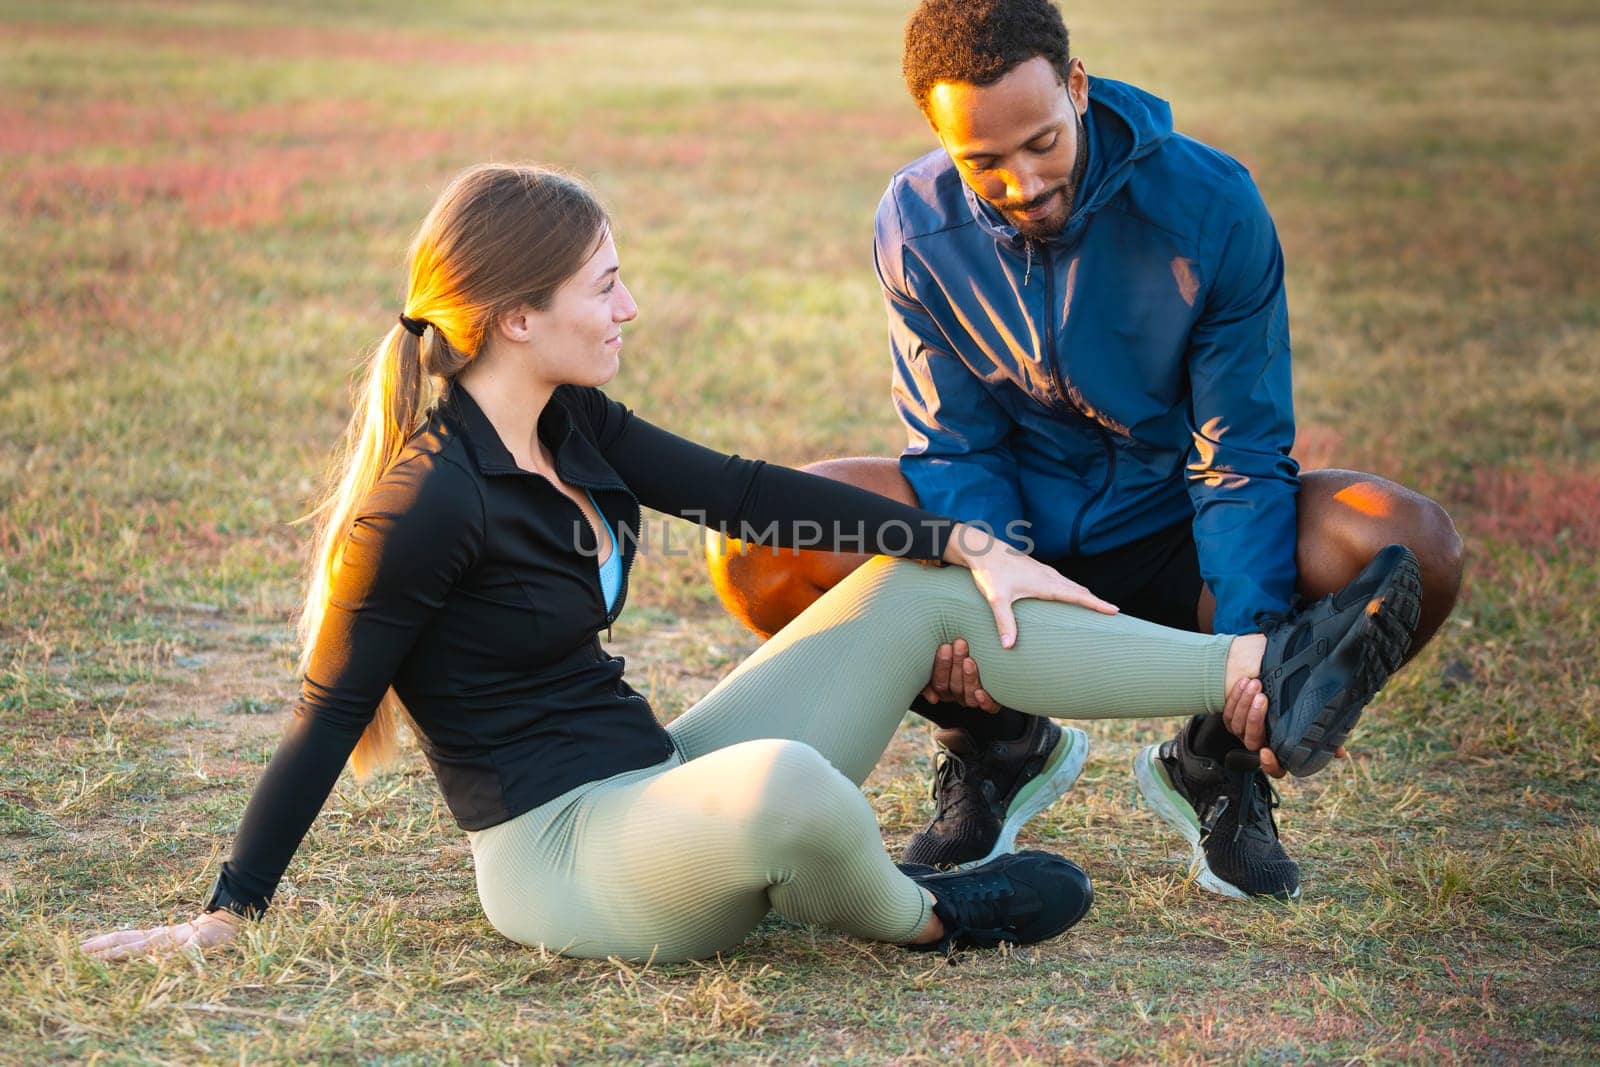 A man receives first aid after suffering an accident while running.Female athlete injured leg seen by male physiotherapist